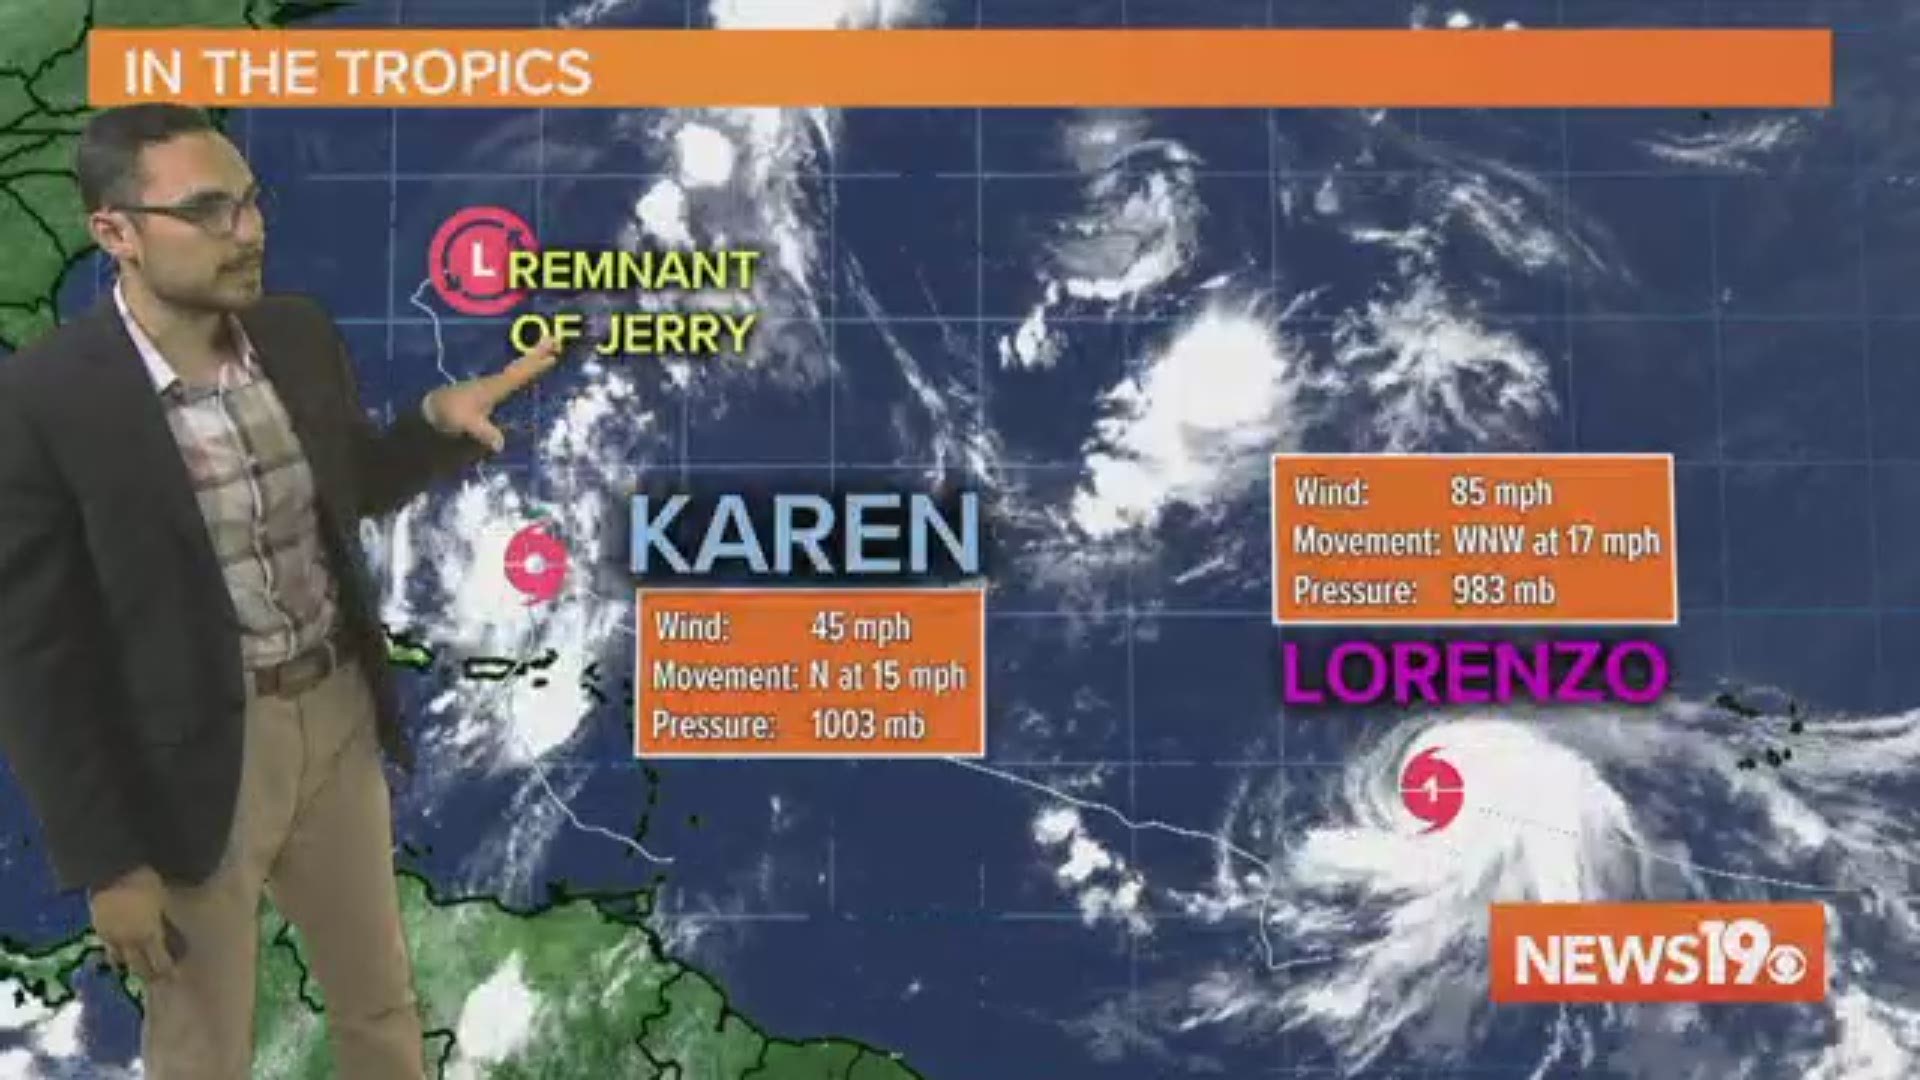 Lorenzo became the 5th hurricane of the season earlier this morning in the Atlantic while Karen remains a low end tropical storm.